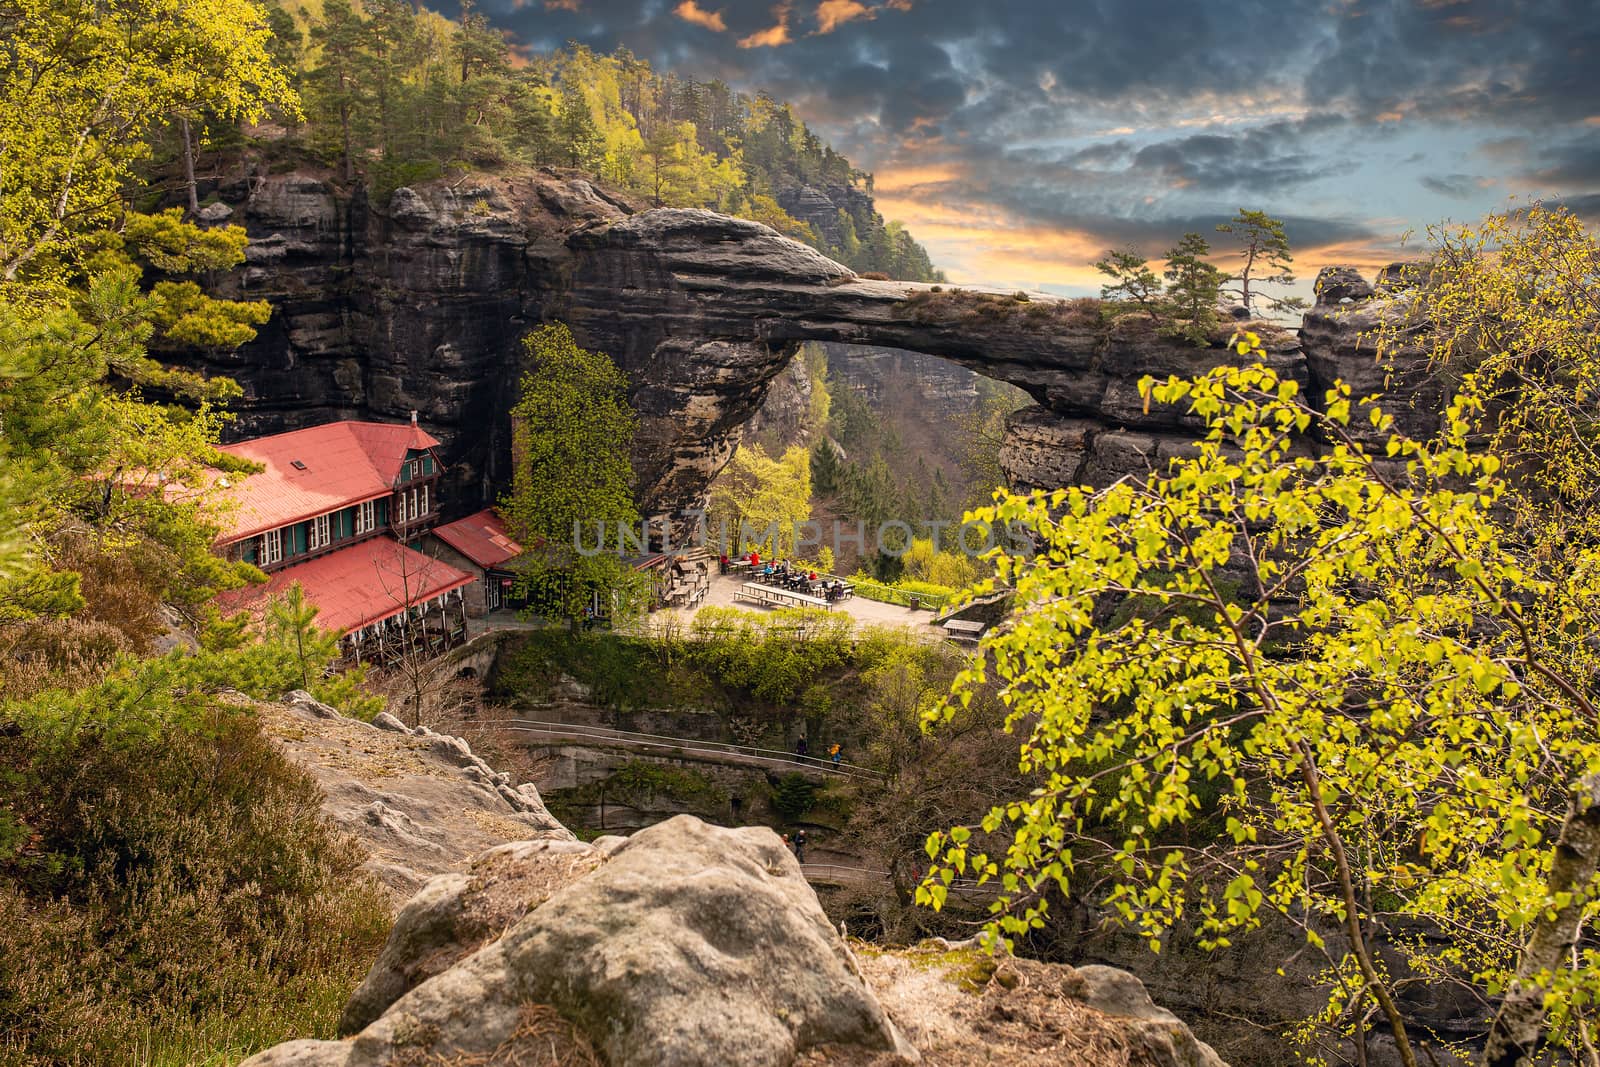 Pravcice Gate is the largest natural rock gate on the European and a national nature monument. It is the most beautiful natural formation in Bohemian Switzerland and is the symbol of the entire area.